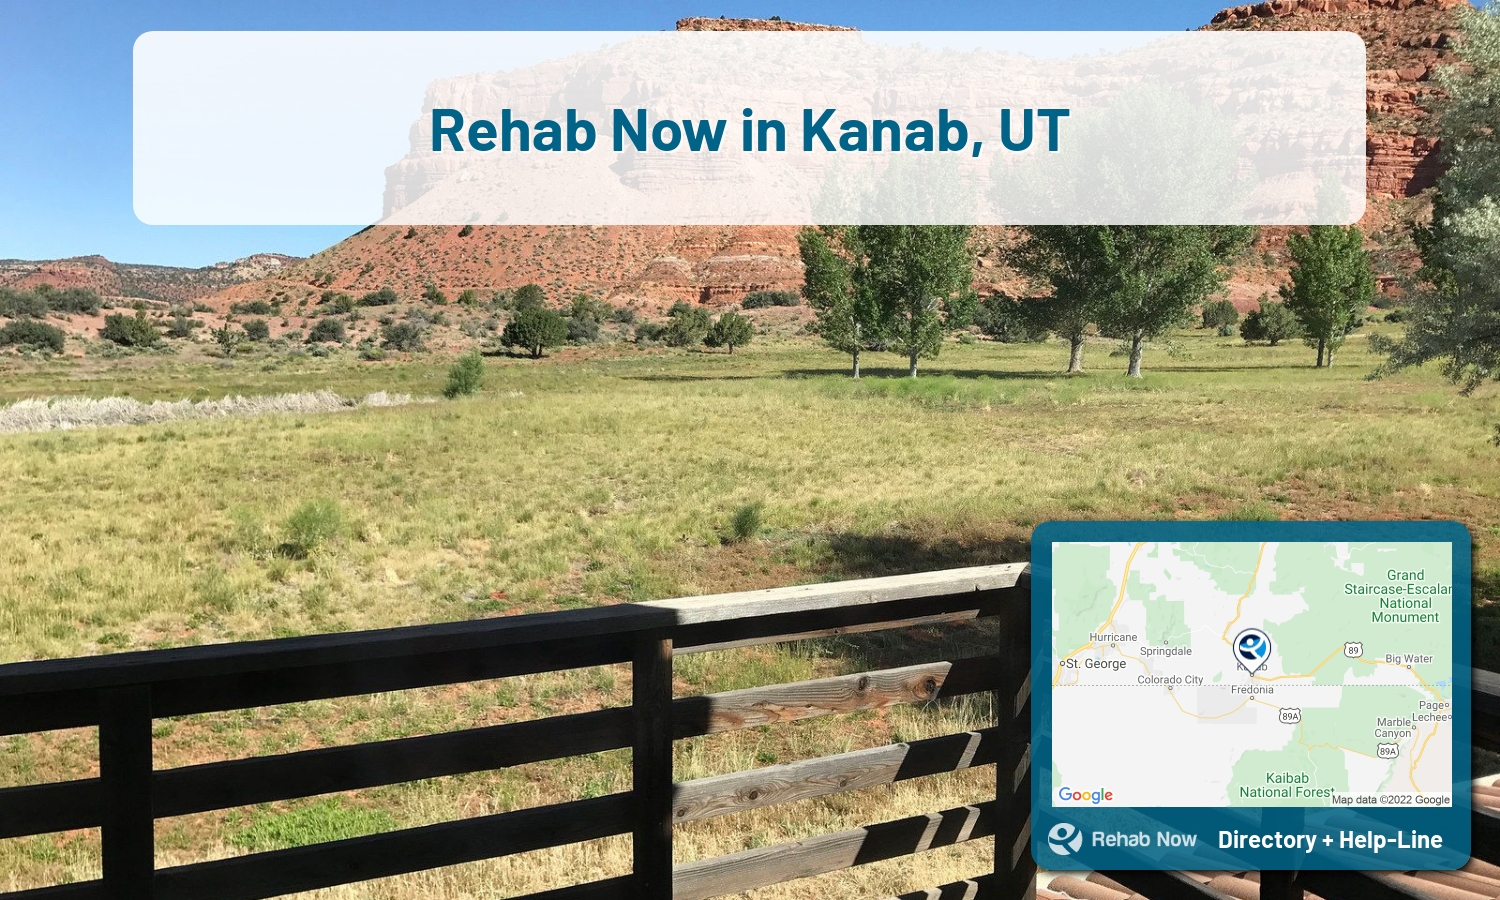 Kanab, UT Treatment Centers. Find drug rehab in Kanab, Utah, or detox and treatment programs. Get the right help now!